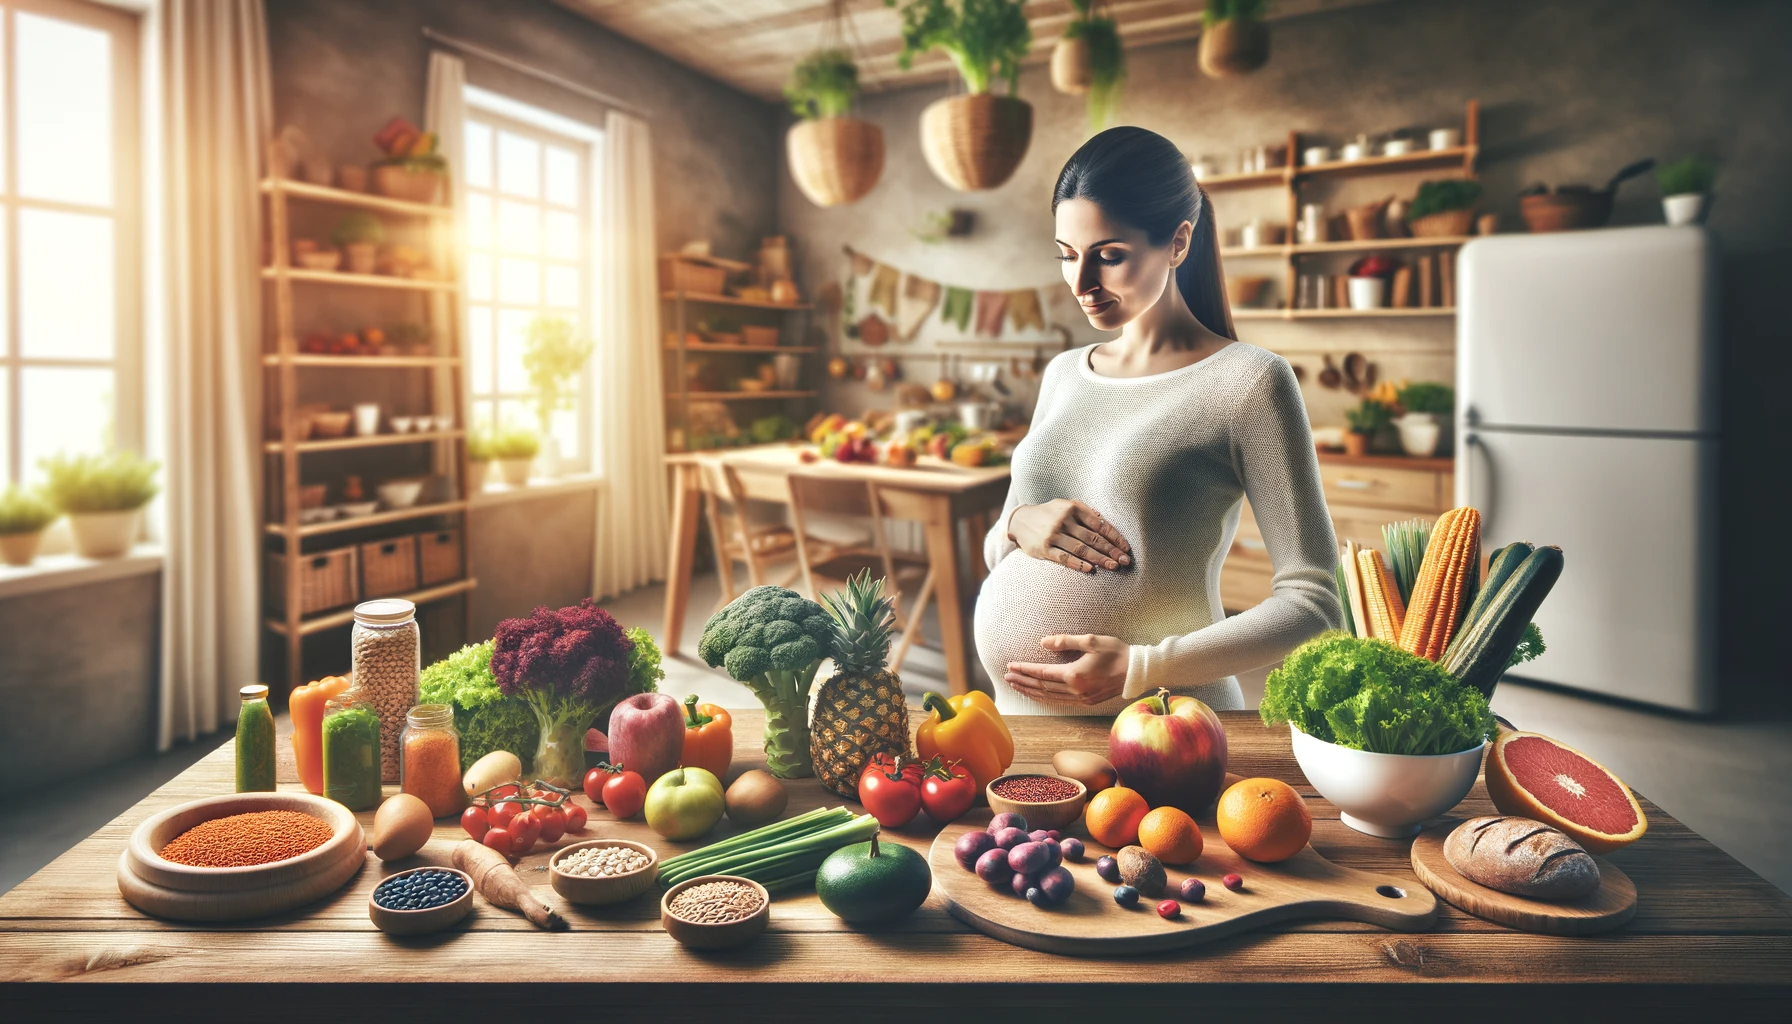 Study: Association of plant-based dietary patterns in first trimester of pregnancy with gestational weight gain: results from a prospective birth cohort